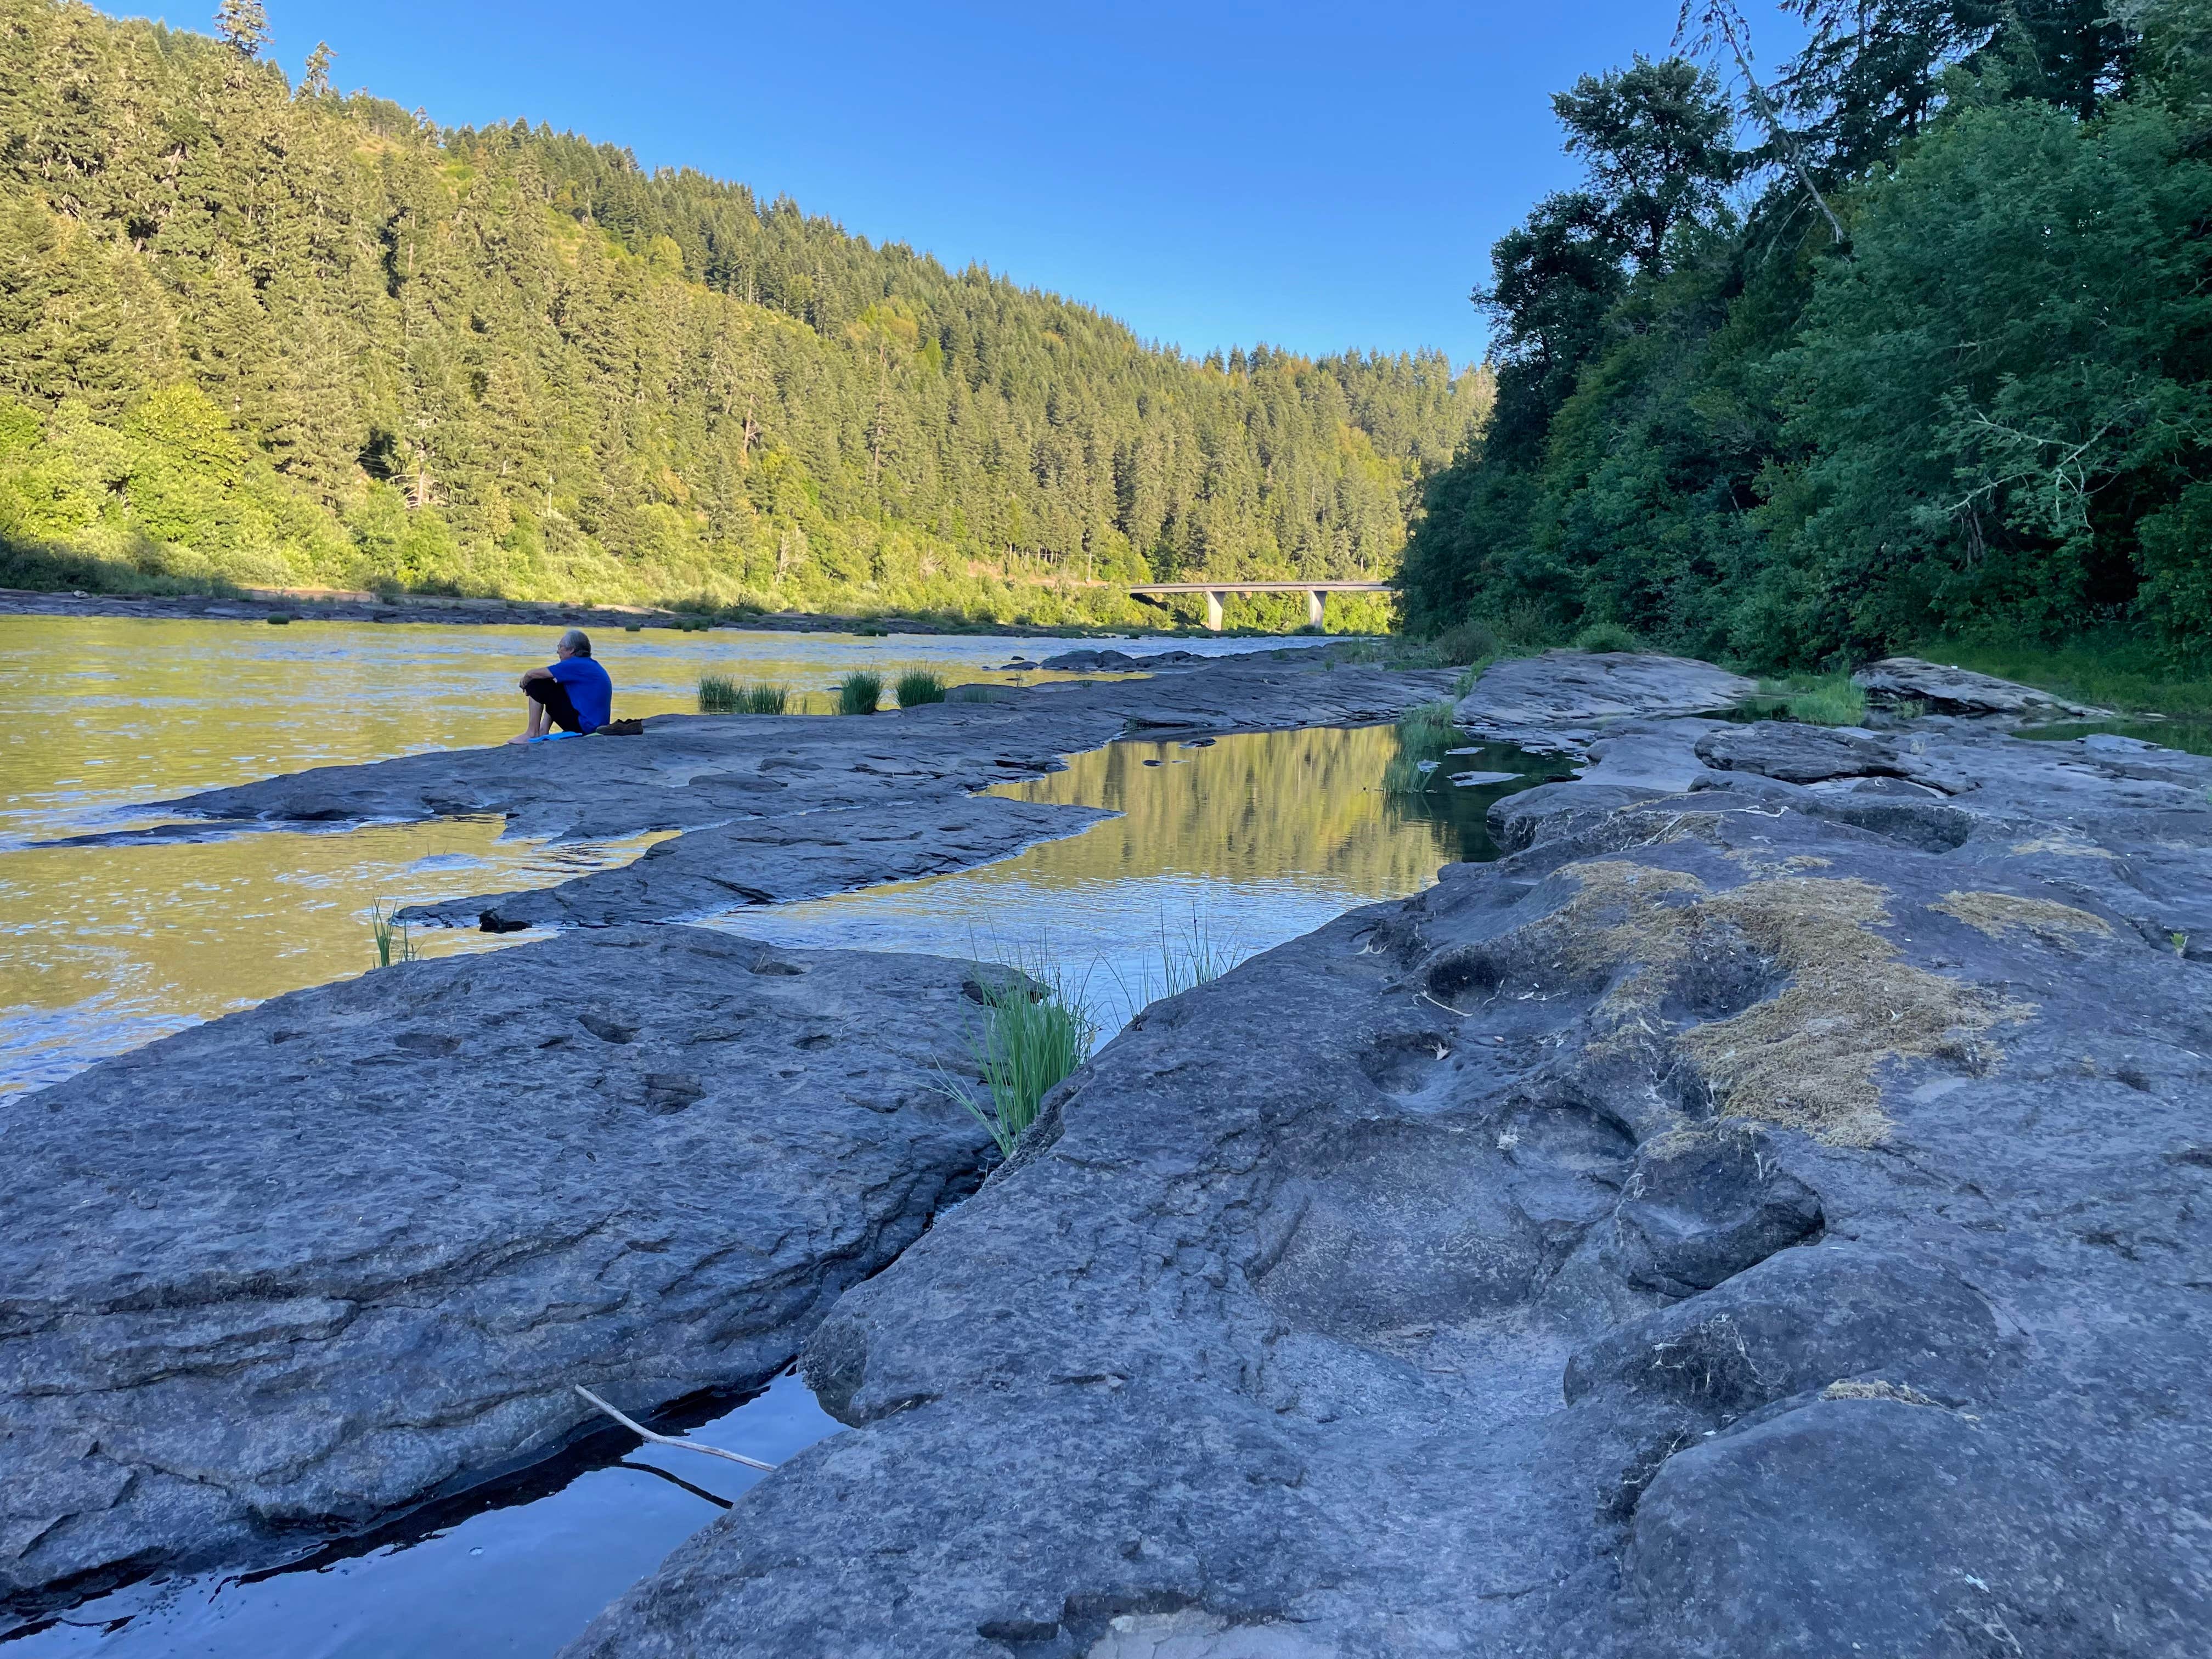 Camper submitted image from Tyee Campground (umpqua River) - 5